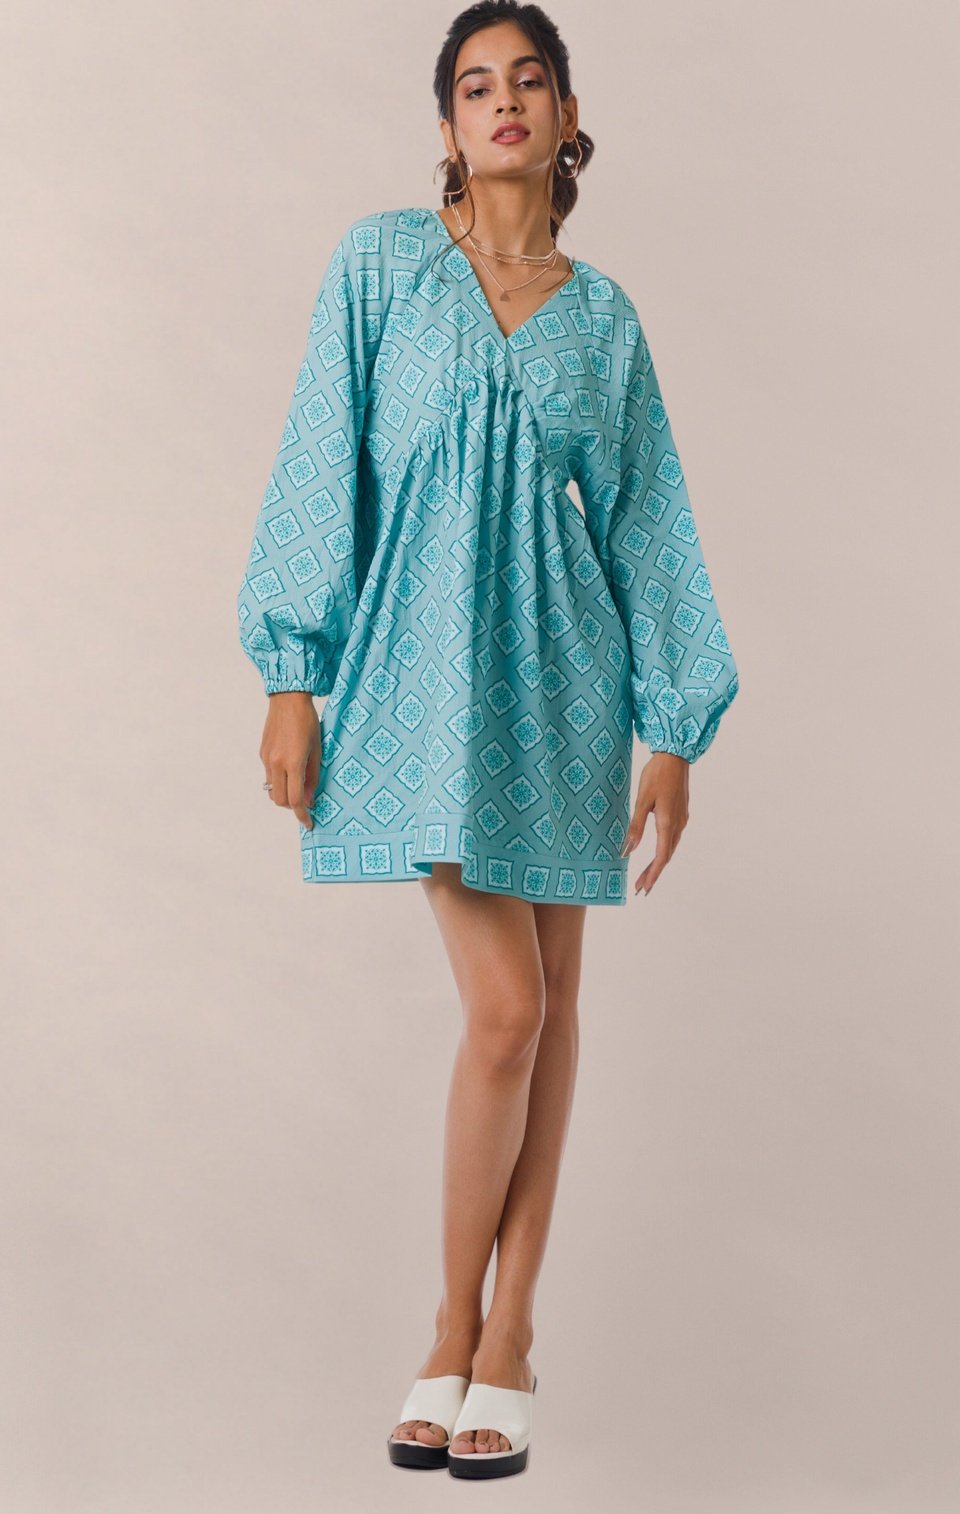 Green Color Comfy Loose-Fitting Print Dress with Raglan Sleeves